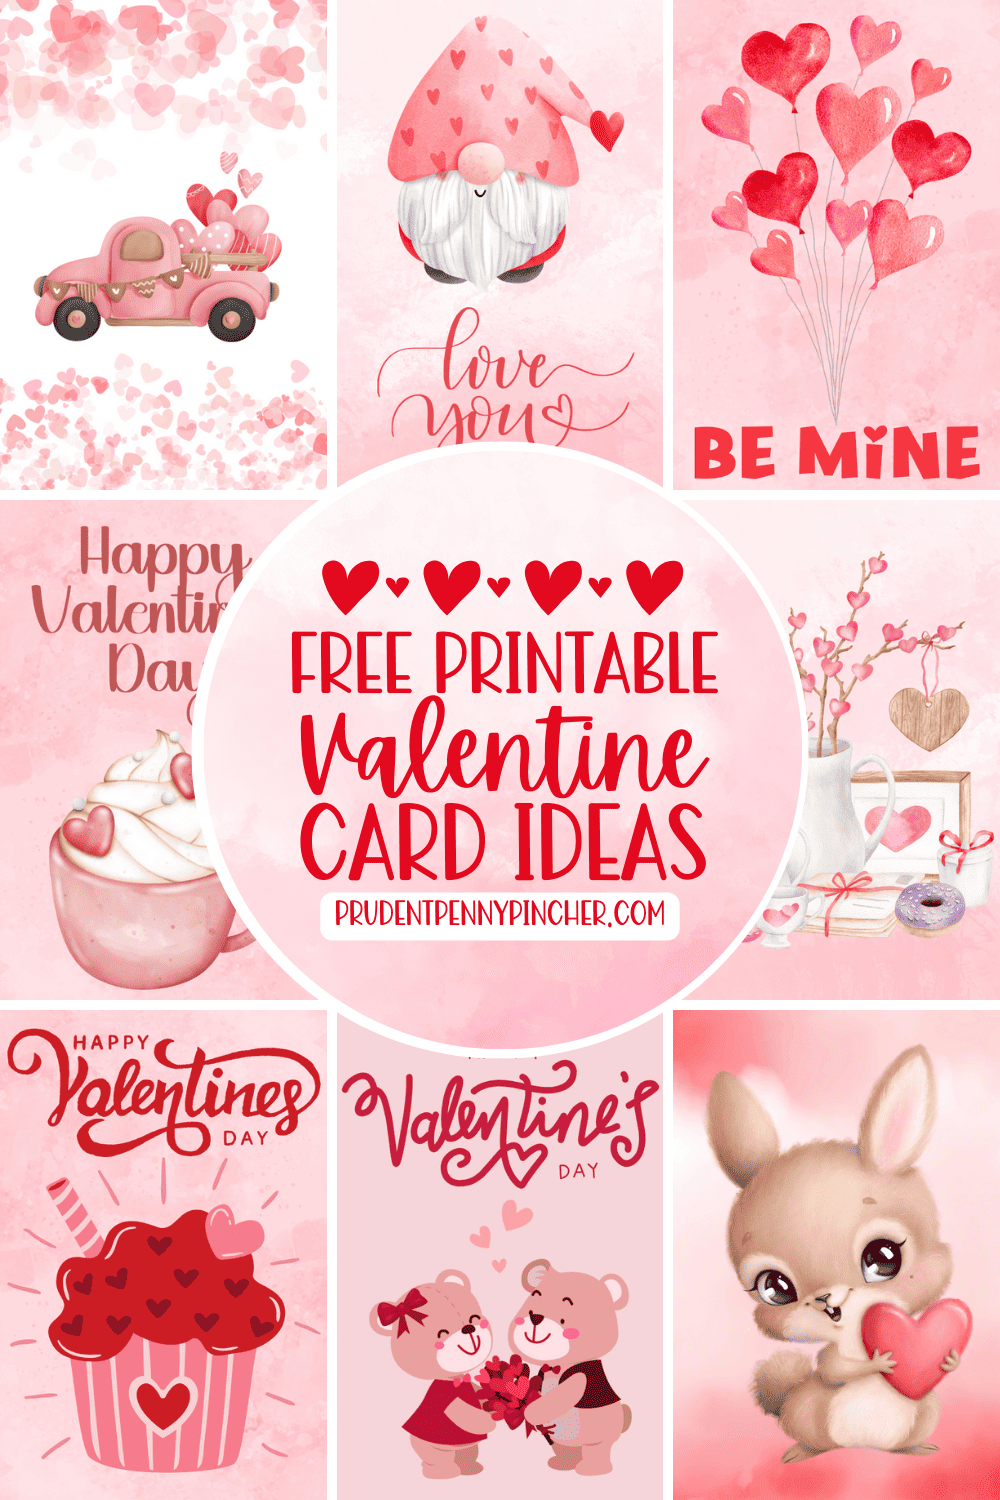 10 Free Printable Valentine's Day Cards